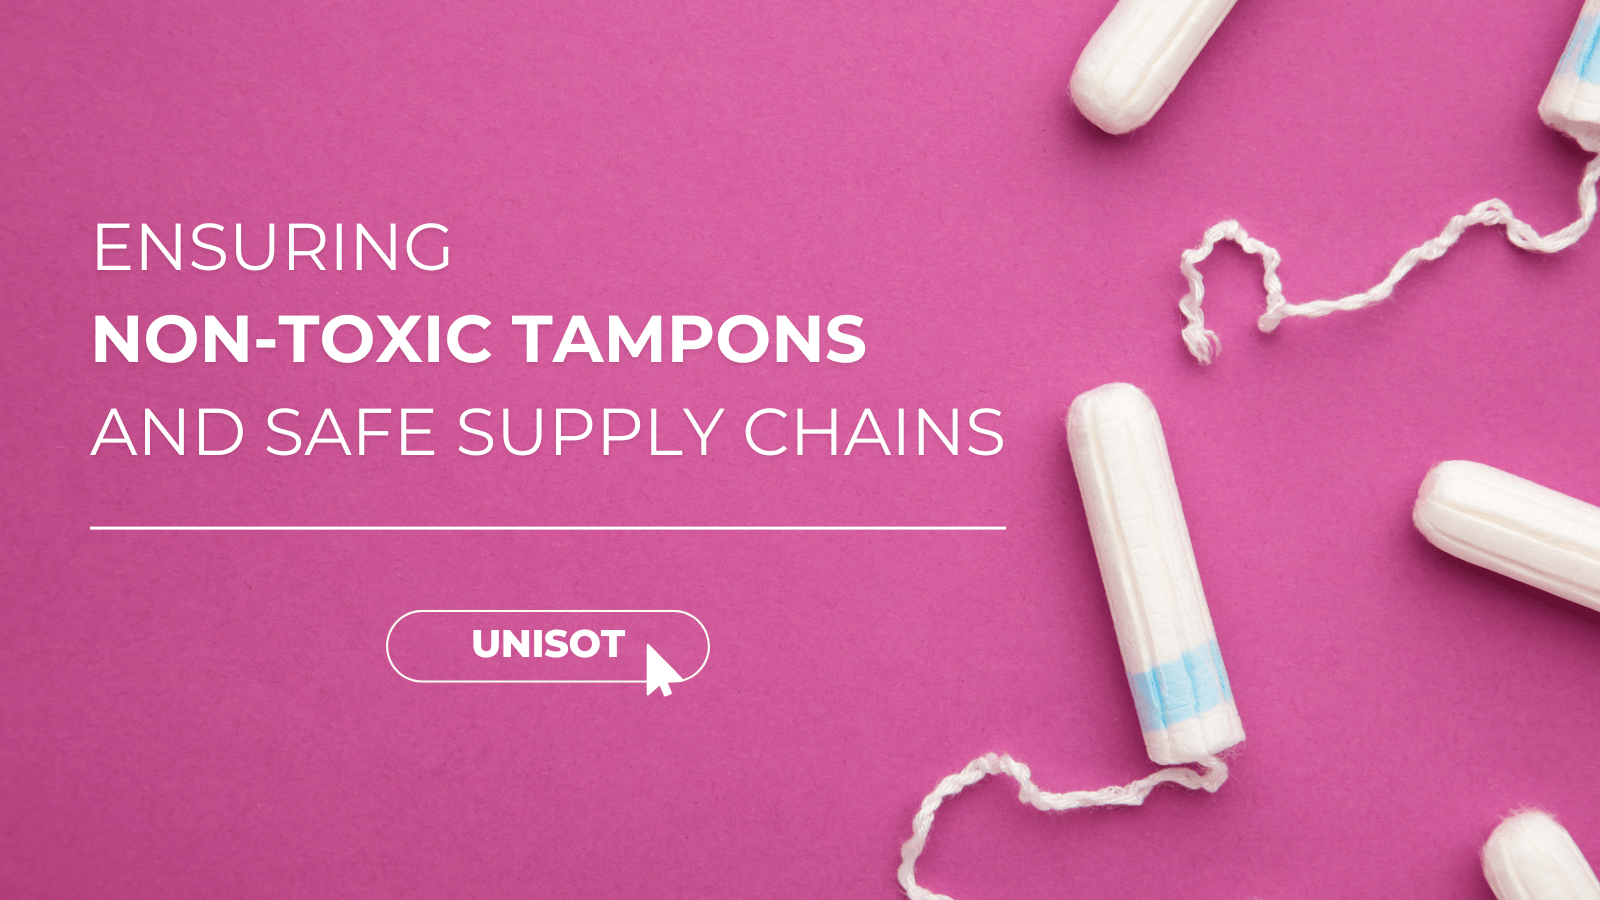 ENSURING NON-TOXIC TAMPONS AND SAFE SUPPLY CHAINS